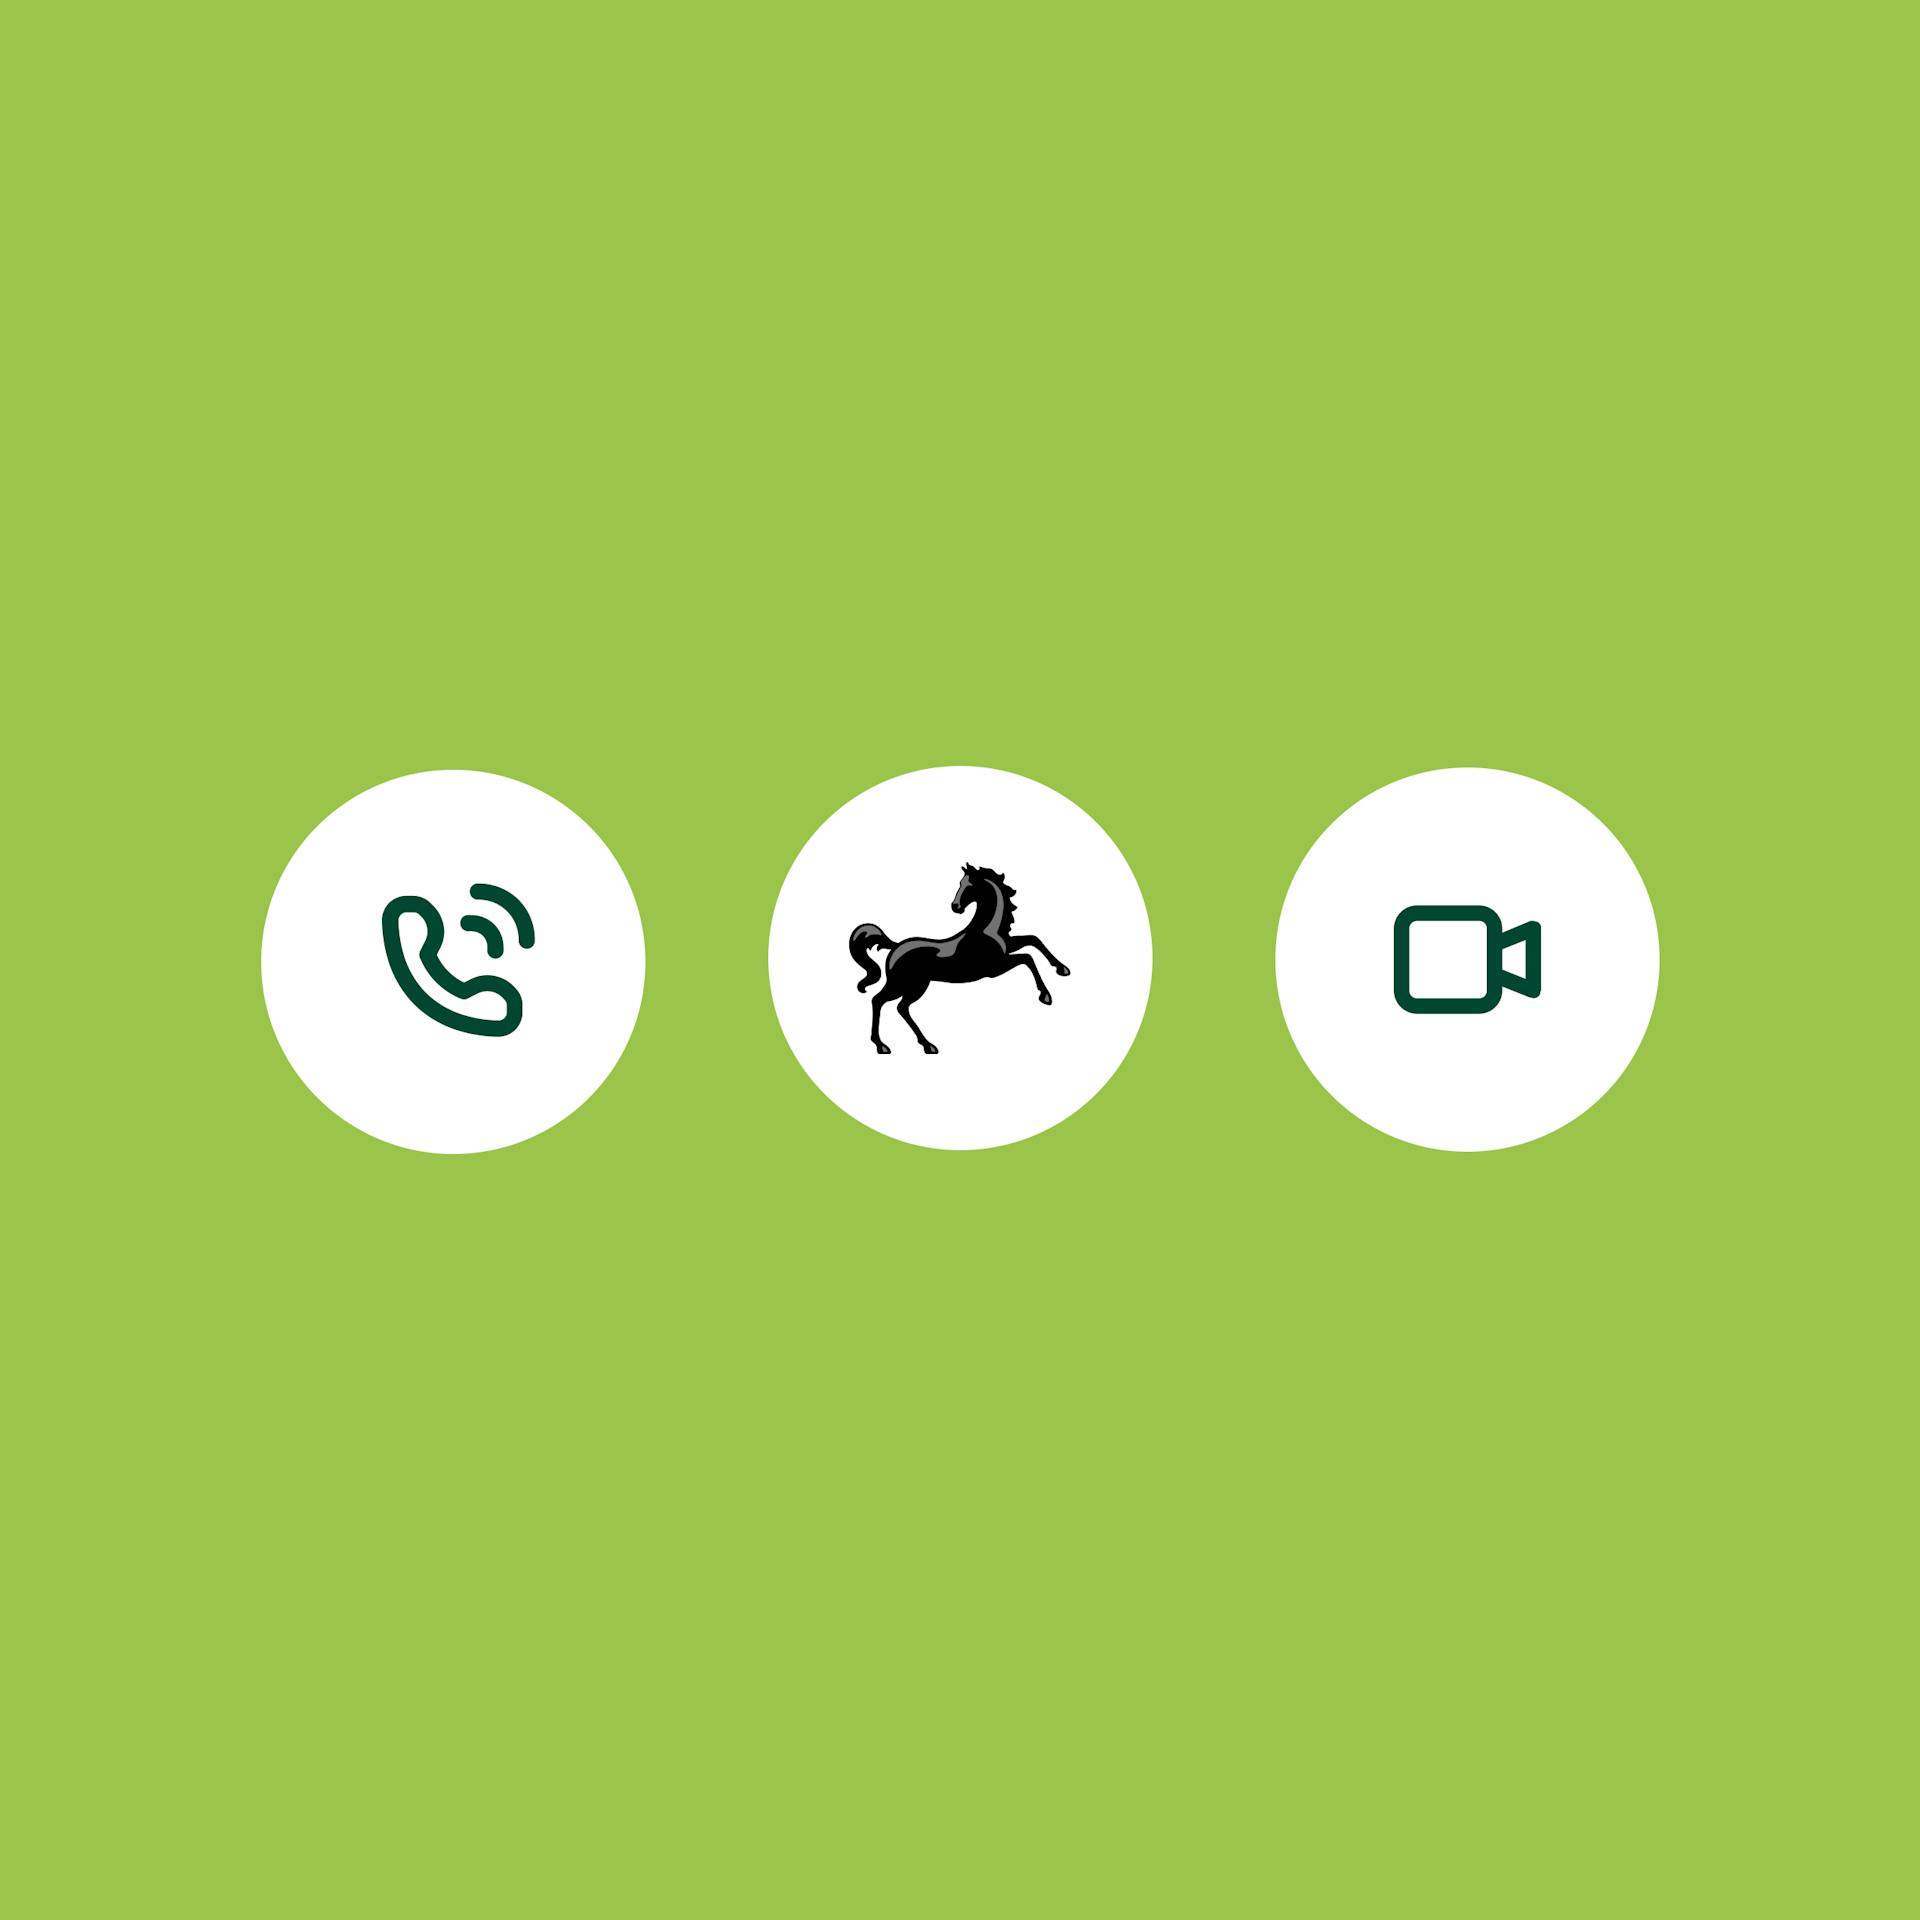 Phone and video icons alongside Lloyds logo on a lime green background